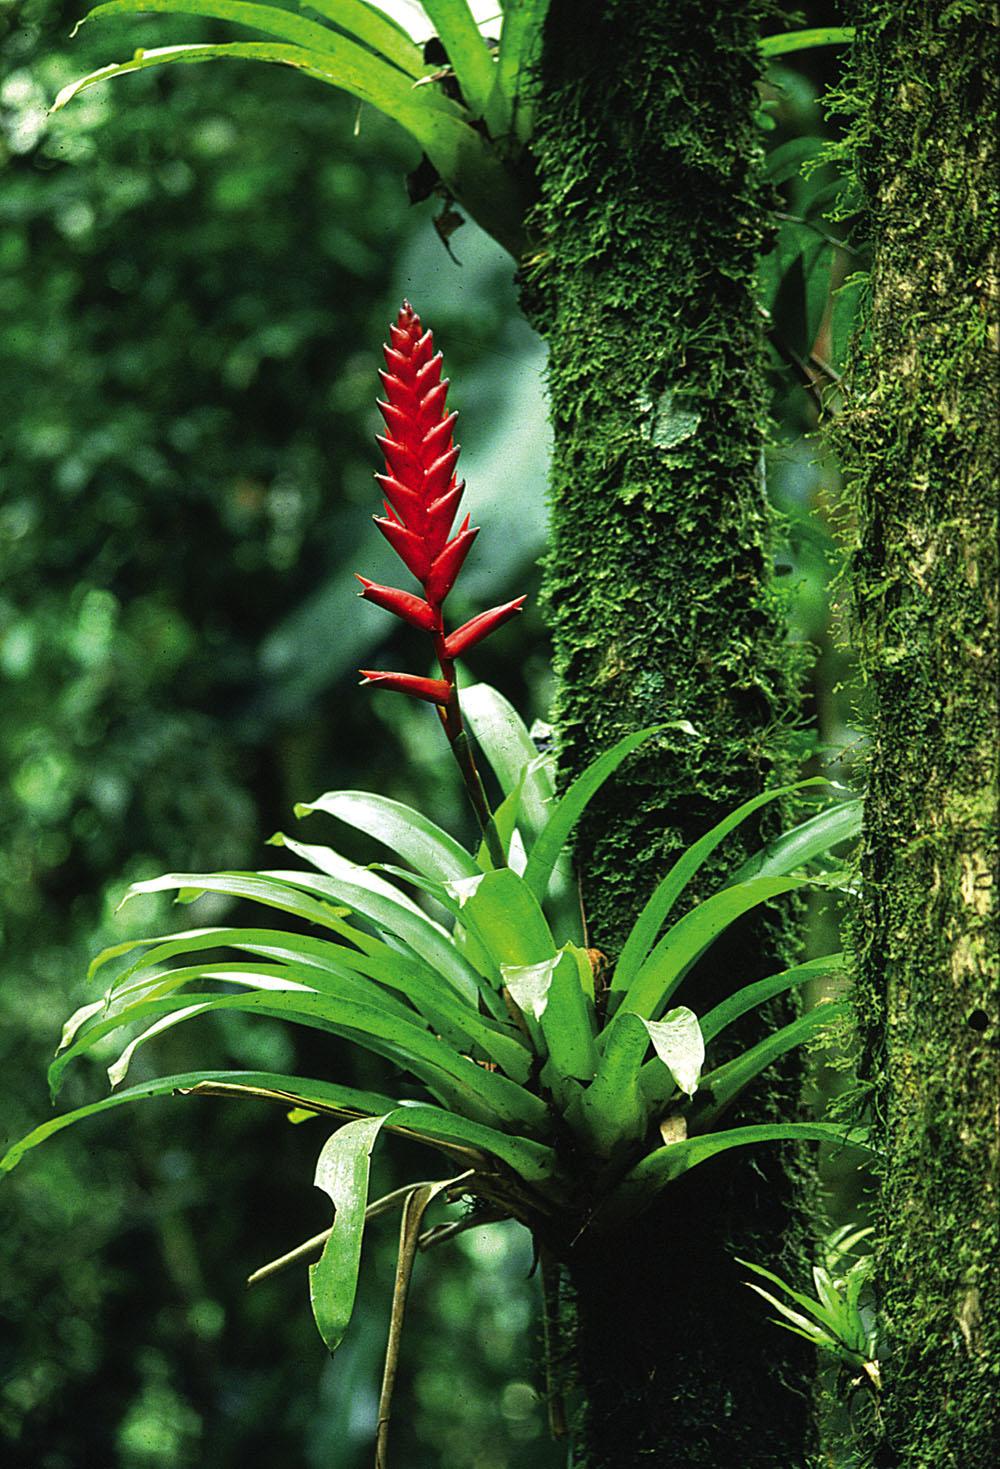 Epiphytes are plants that attach themselves to the trunks or branches of large trees for access to sunlight;